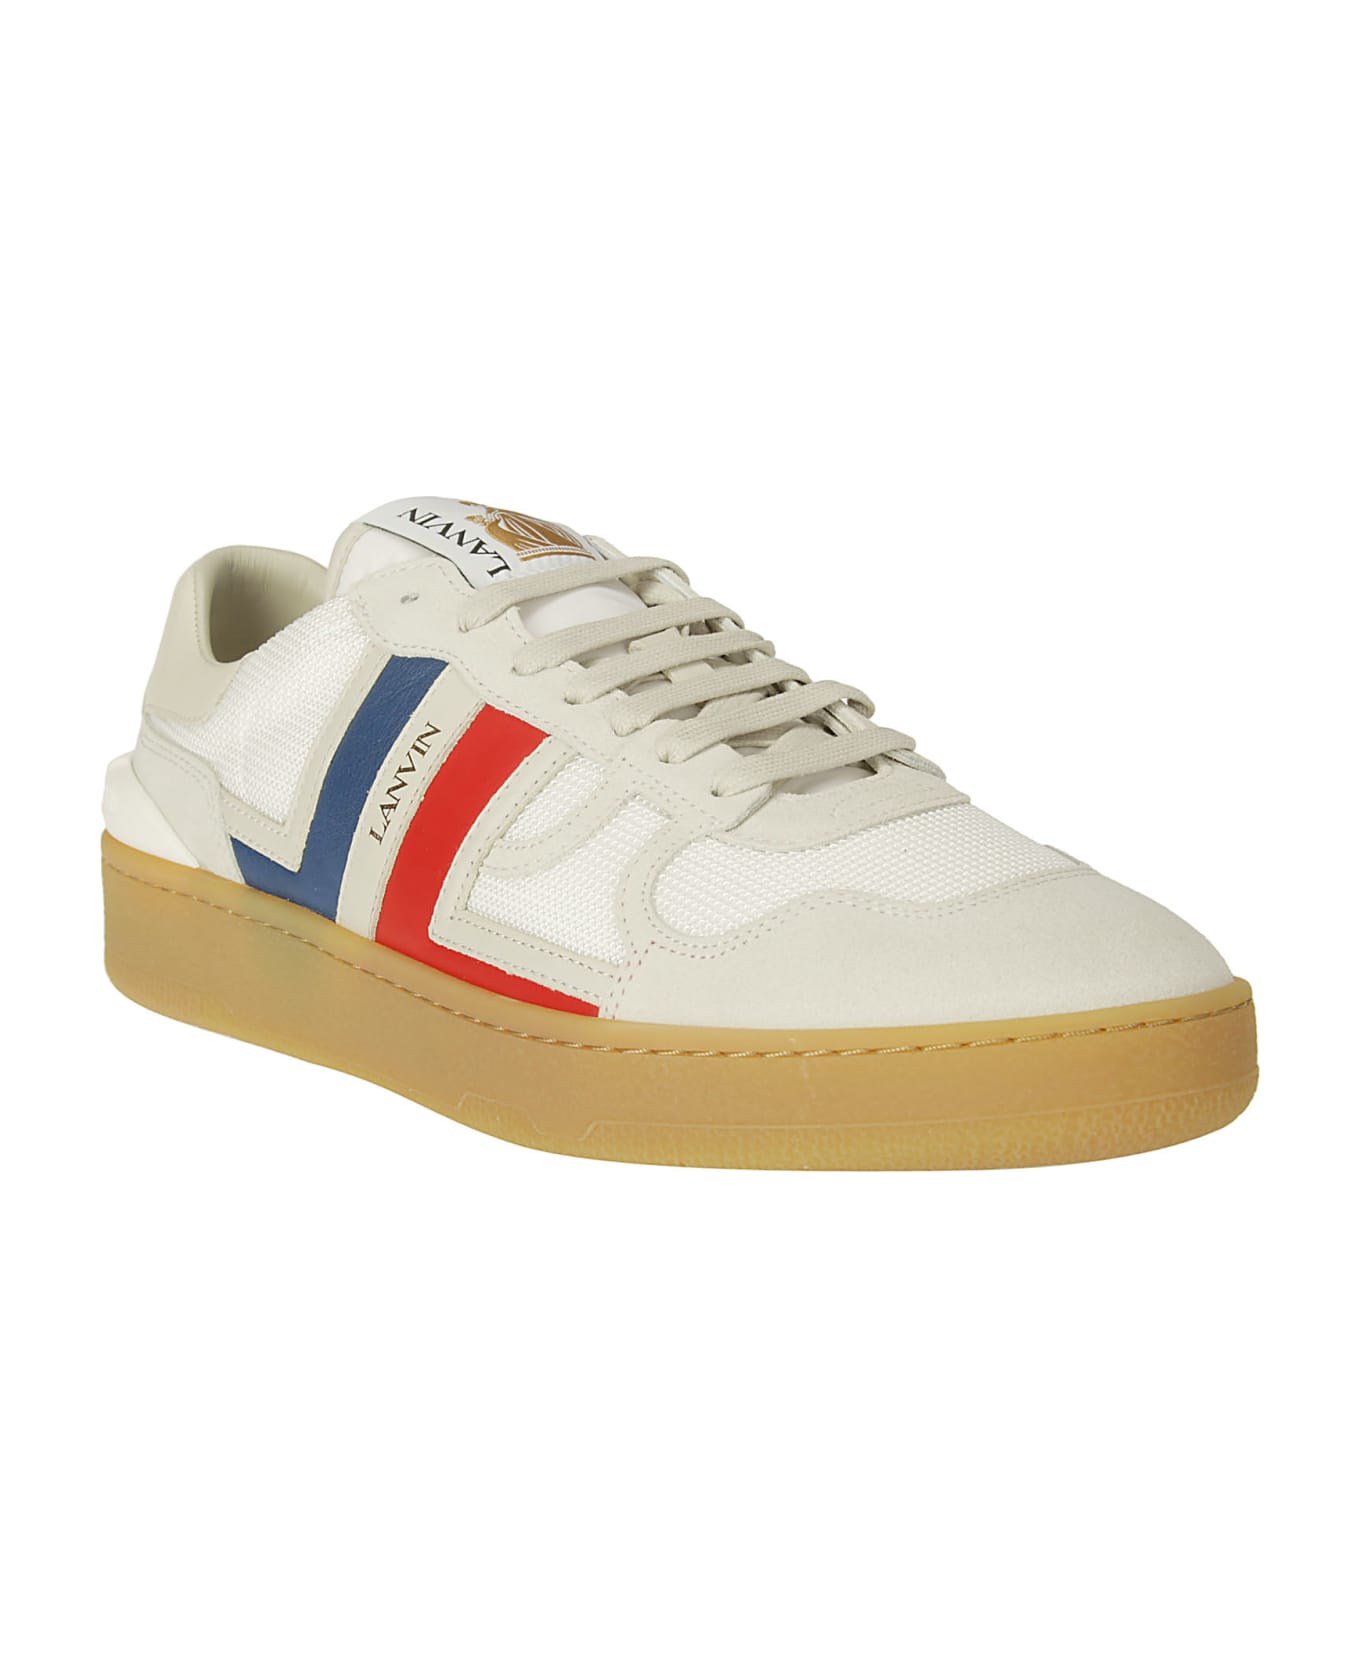 Lanvin Clay Low Top Sneakers - WHITE/MULTICOLOUR スニーカー